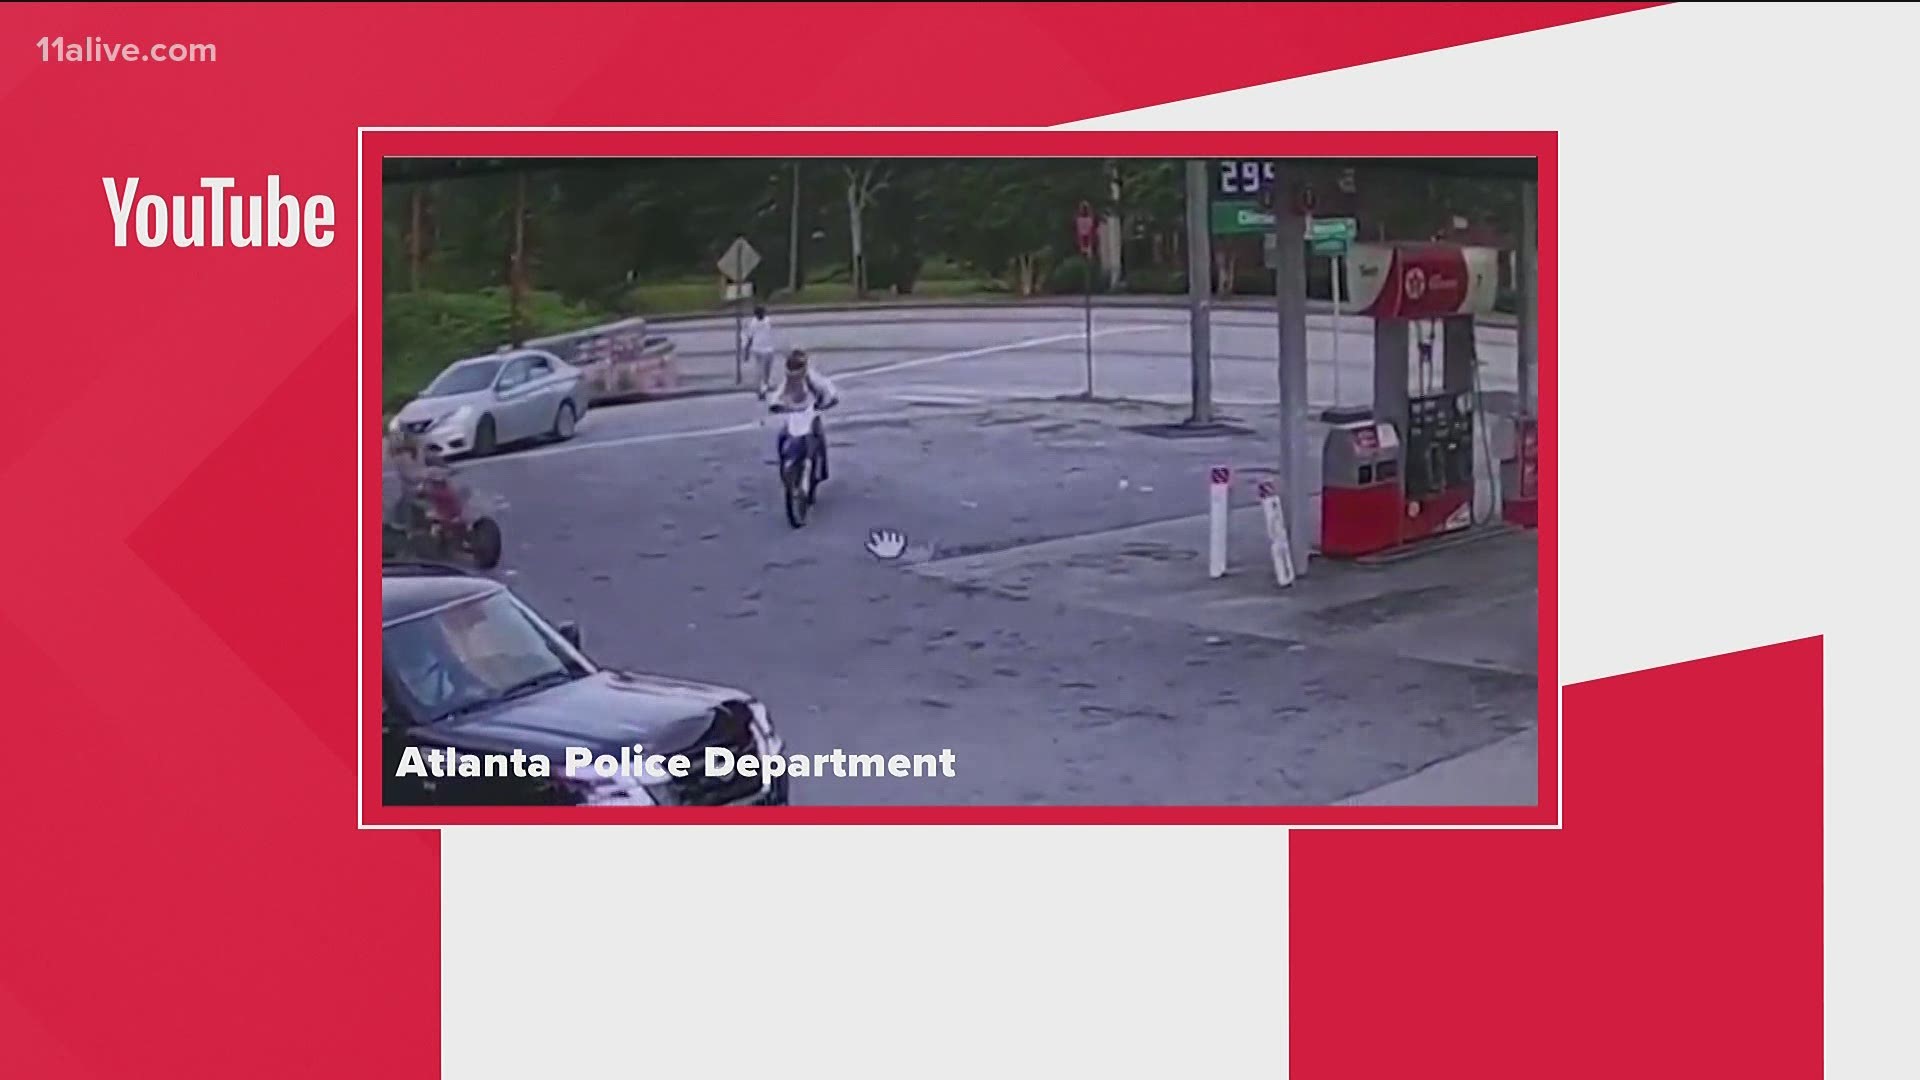 Atlanta Police and Crime Stoppers are offering a $5,000 reward for anyone who can help them with information that could identify and prosecute the driver.